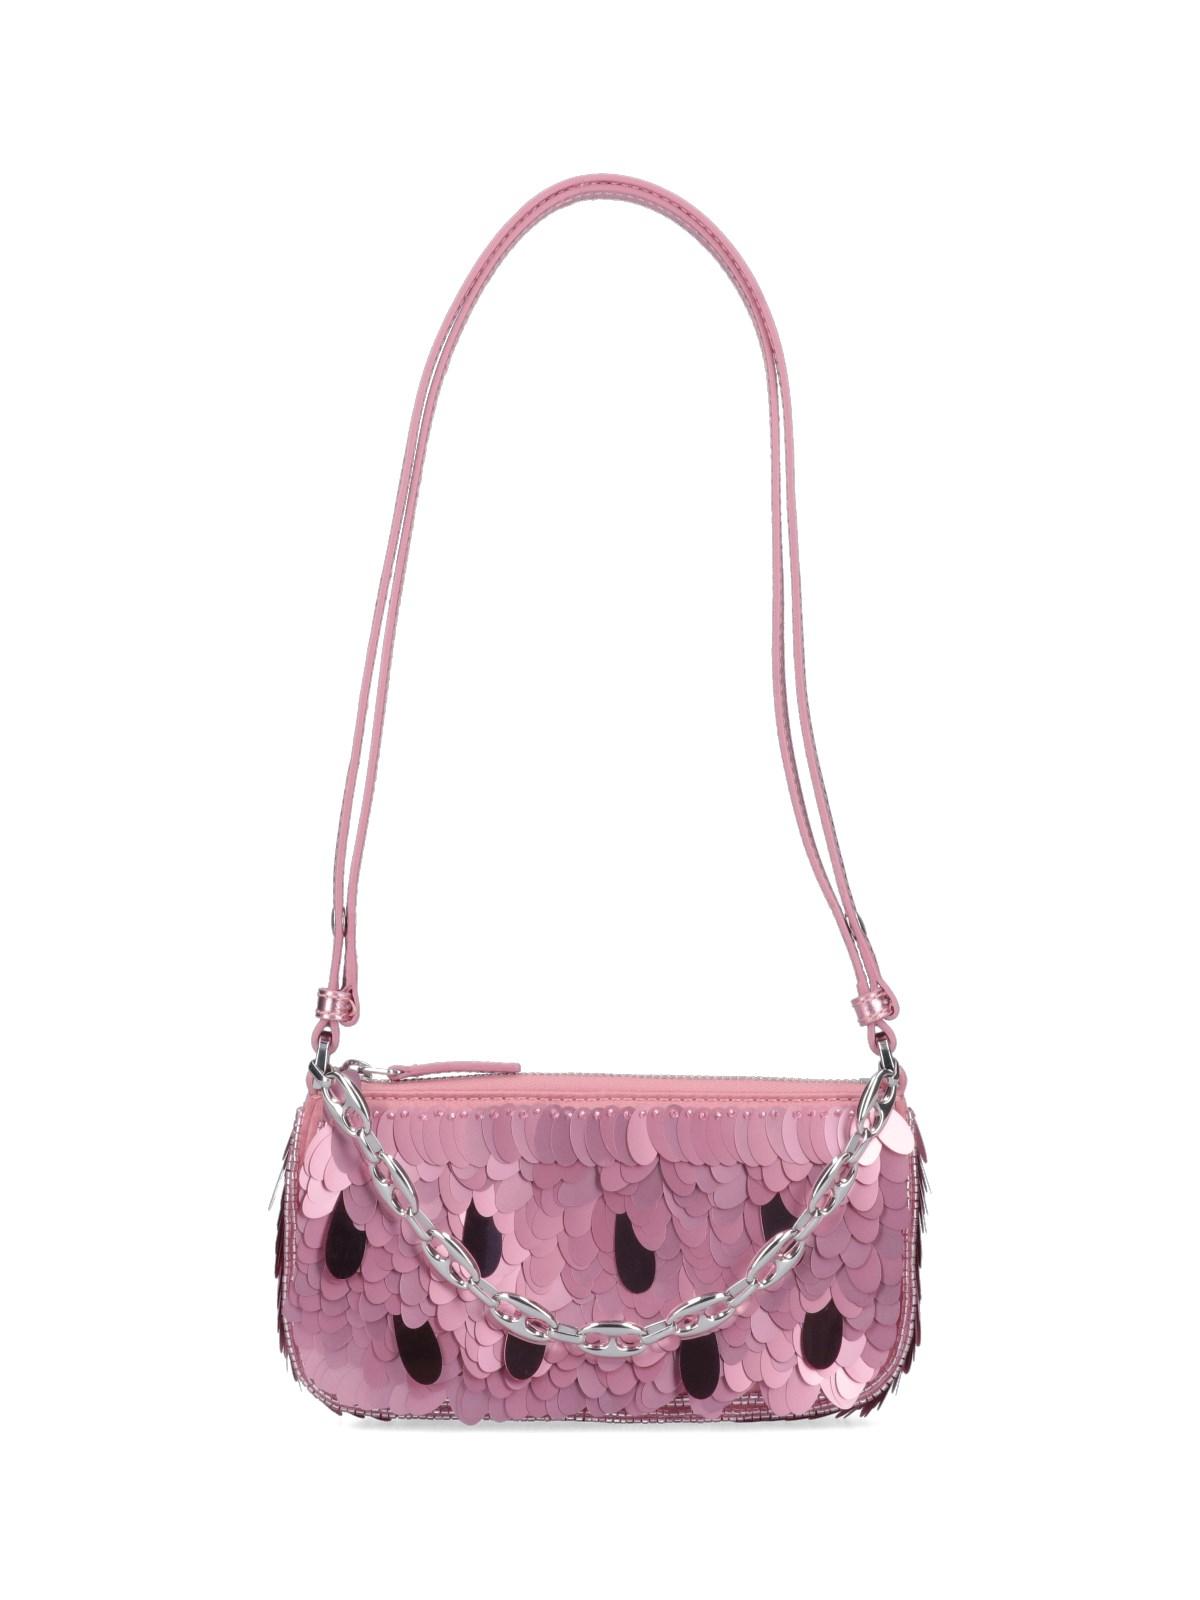 Turn On The Sparkle Hot Pink Sequin Purse | Wholesale Accessory Market